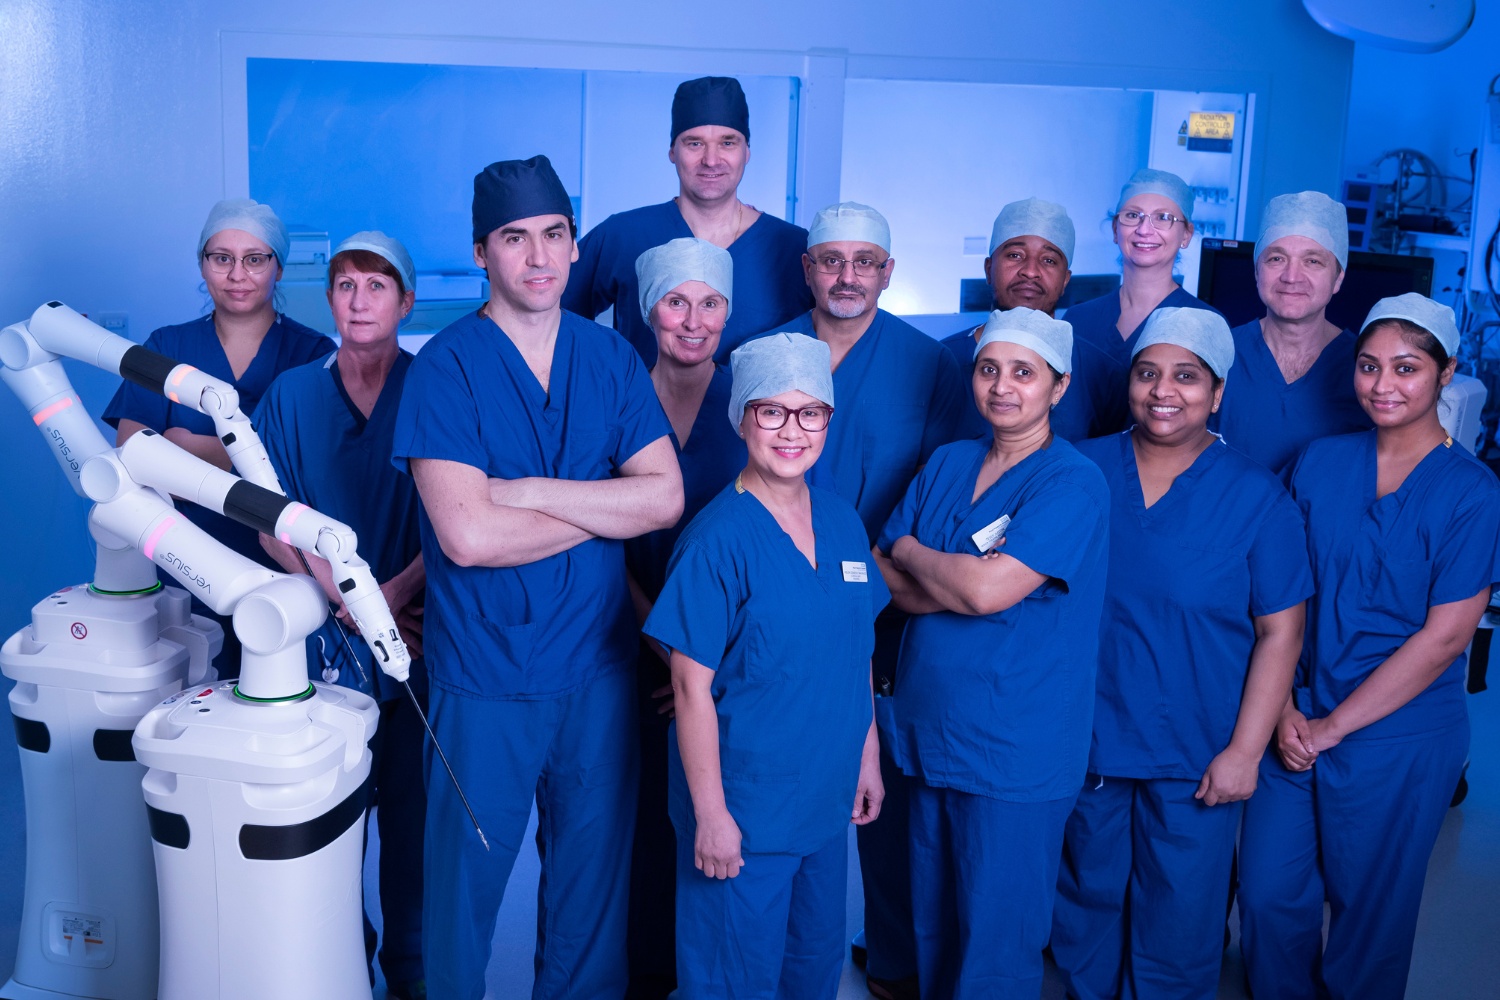 14 people stood in surgical scrubs next to the surgical robot in a surgical theatre.